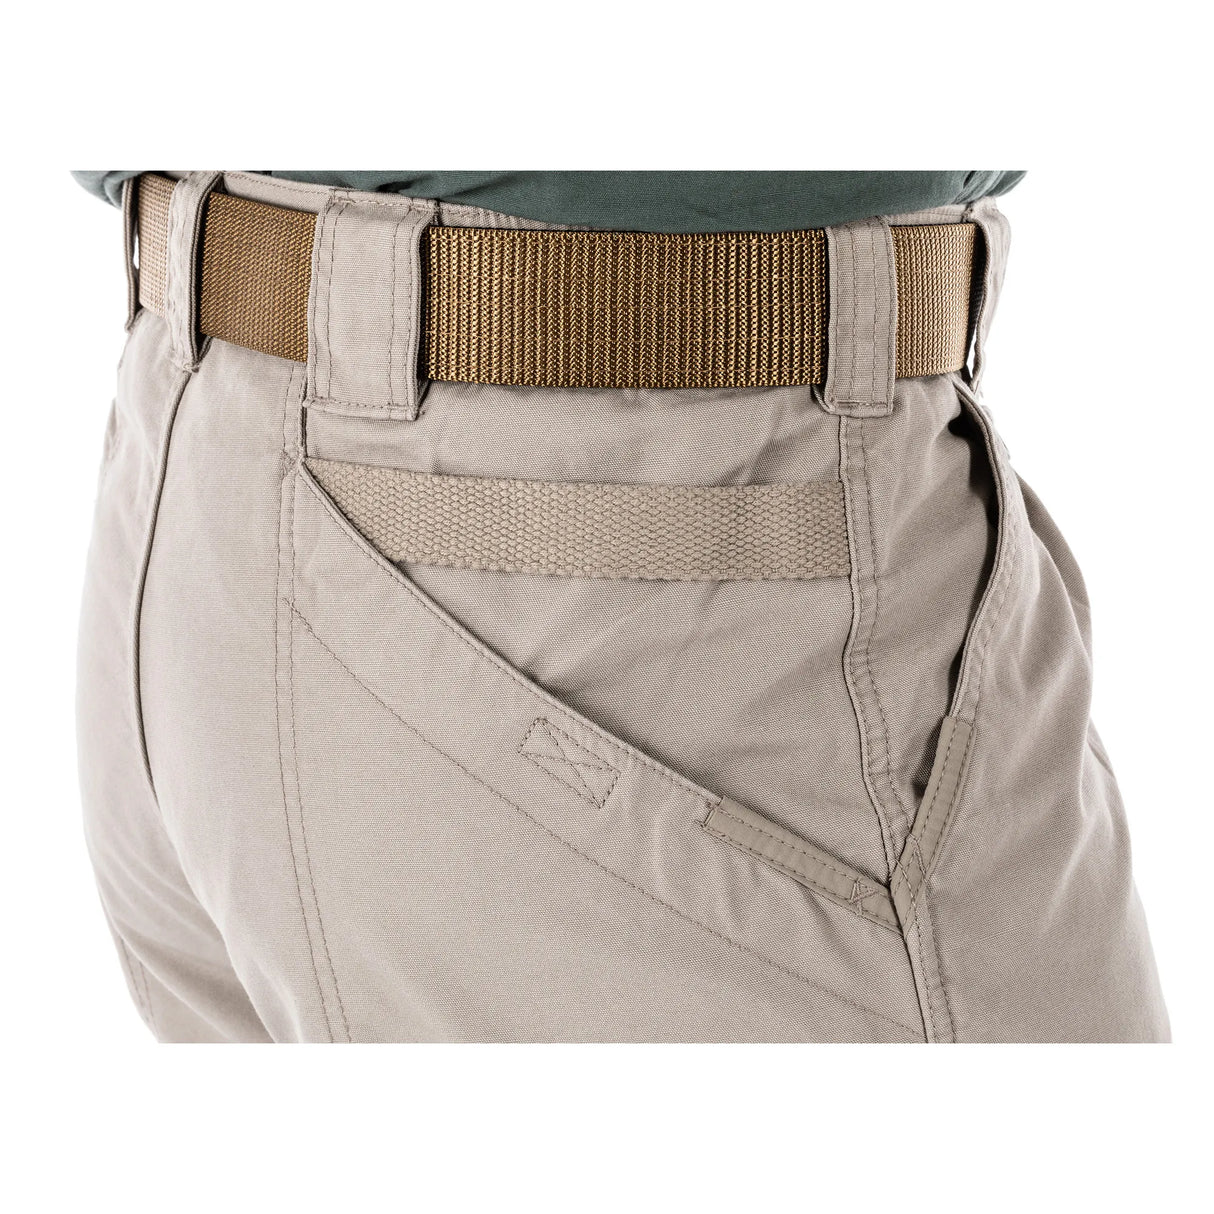 Trademarked Backstrap Pants: Features unique design elements for added functionality and style.